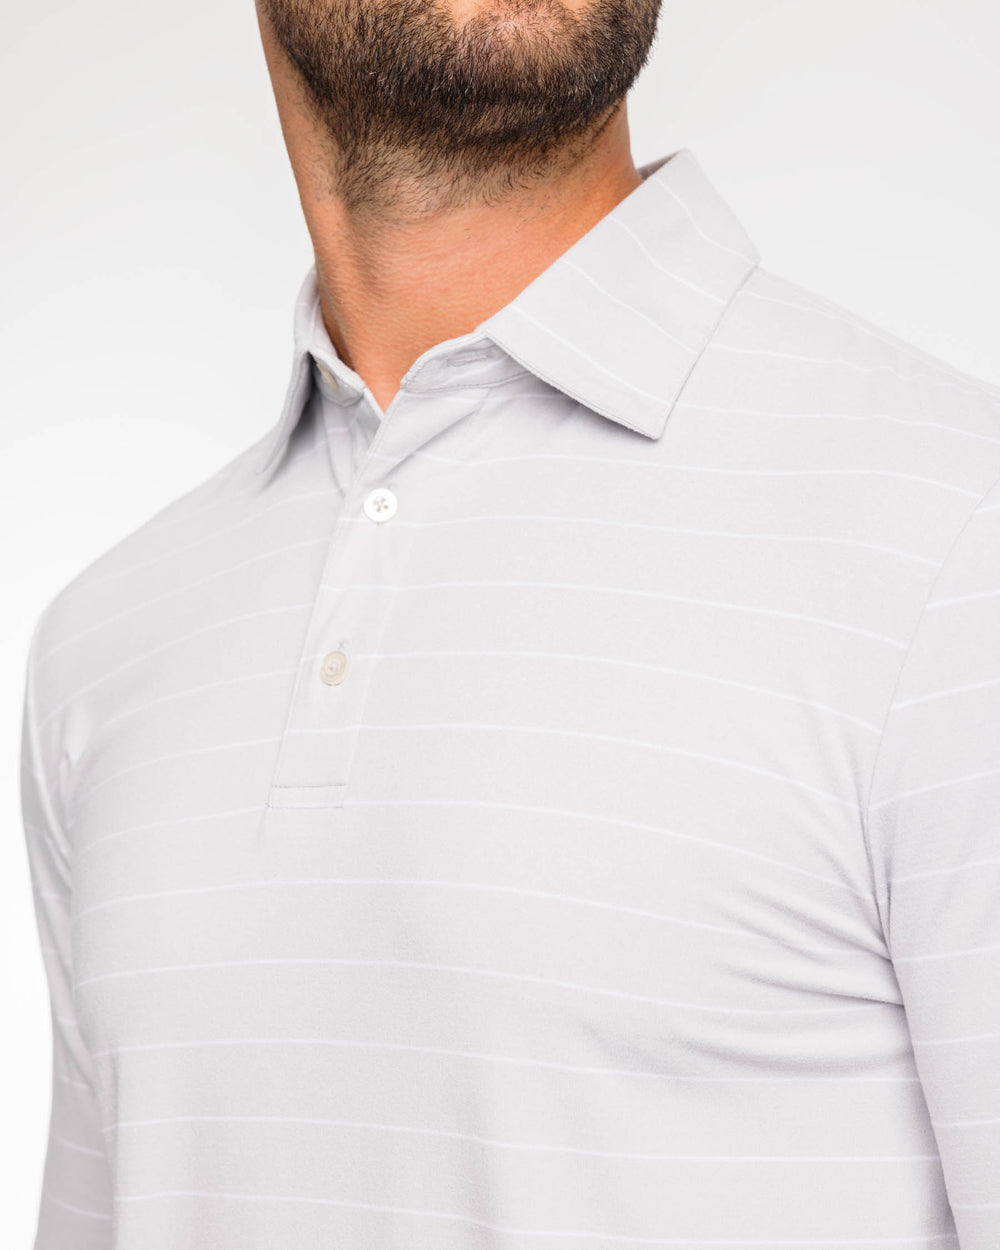 The detail view of the Ryder Bartlett Stripe Performance Polo Shirt by Southern Tide - Heather Seagull Grey